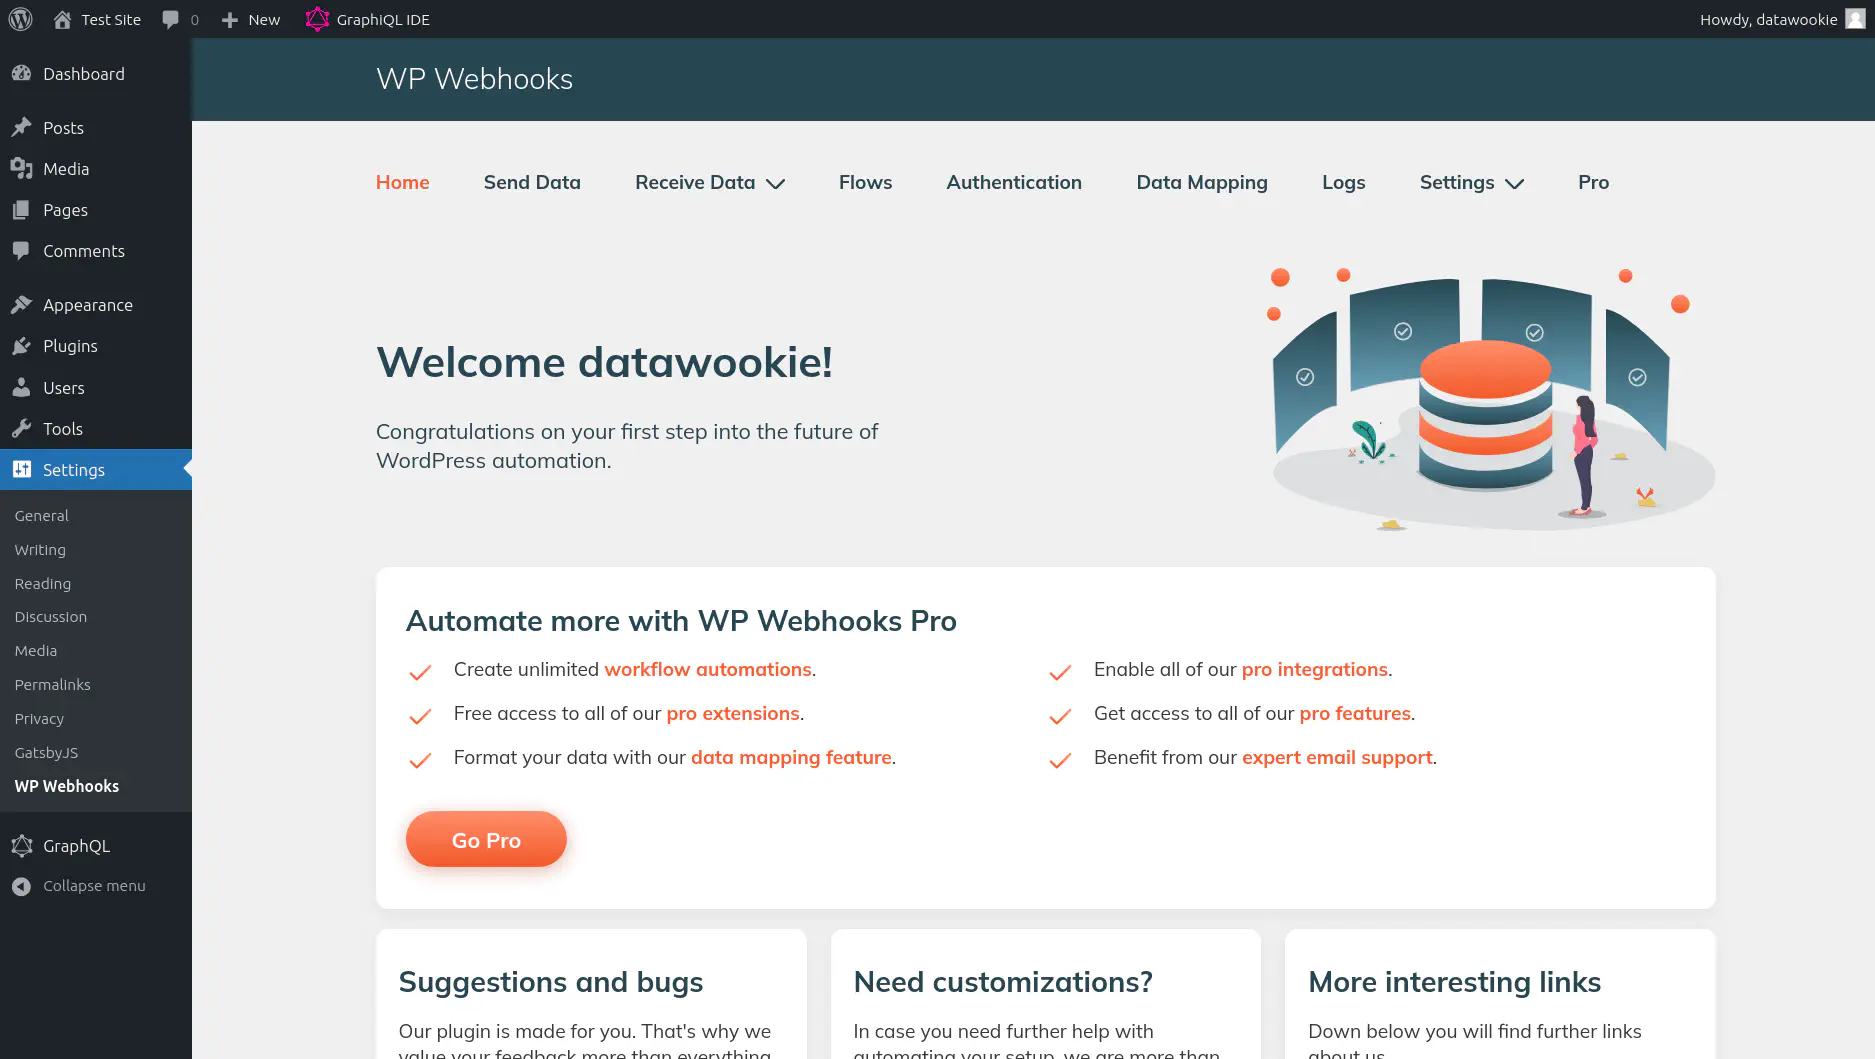 Dashboard for the WP Webhooks plugin.